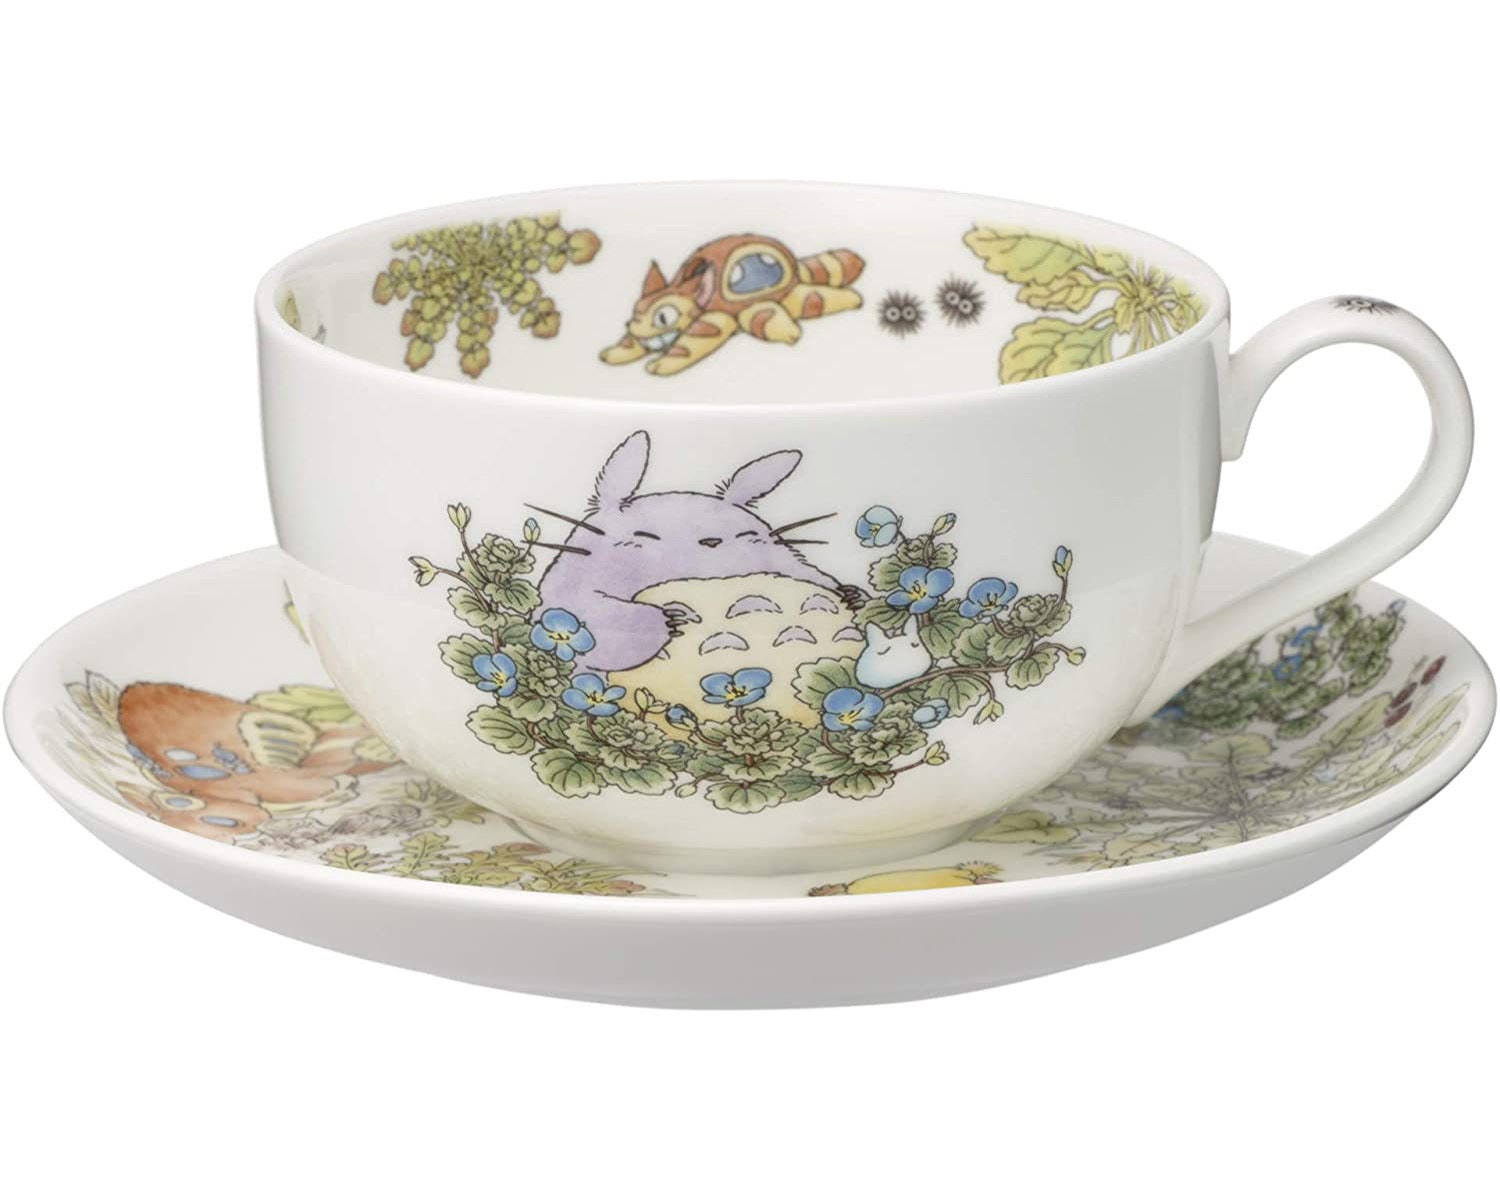 Tea Set Illustration Rogue Anime Teacup Anime Tea In A Teacup Anime Images  Background Tea Time Pictures Background Image And Wallpaper for Free  Download